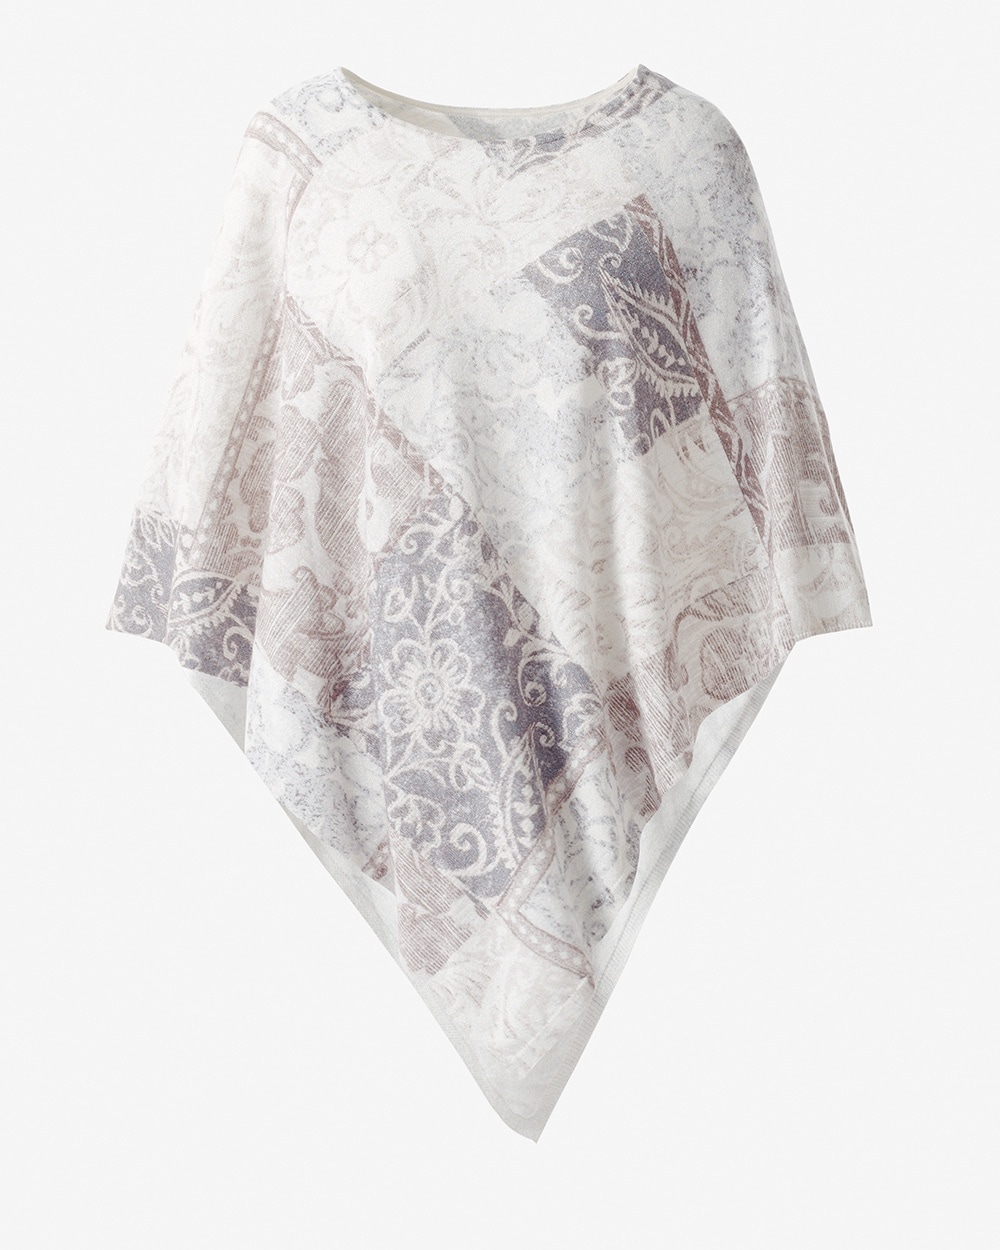 Winter Patchwork Triangle Poncho